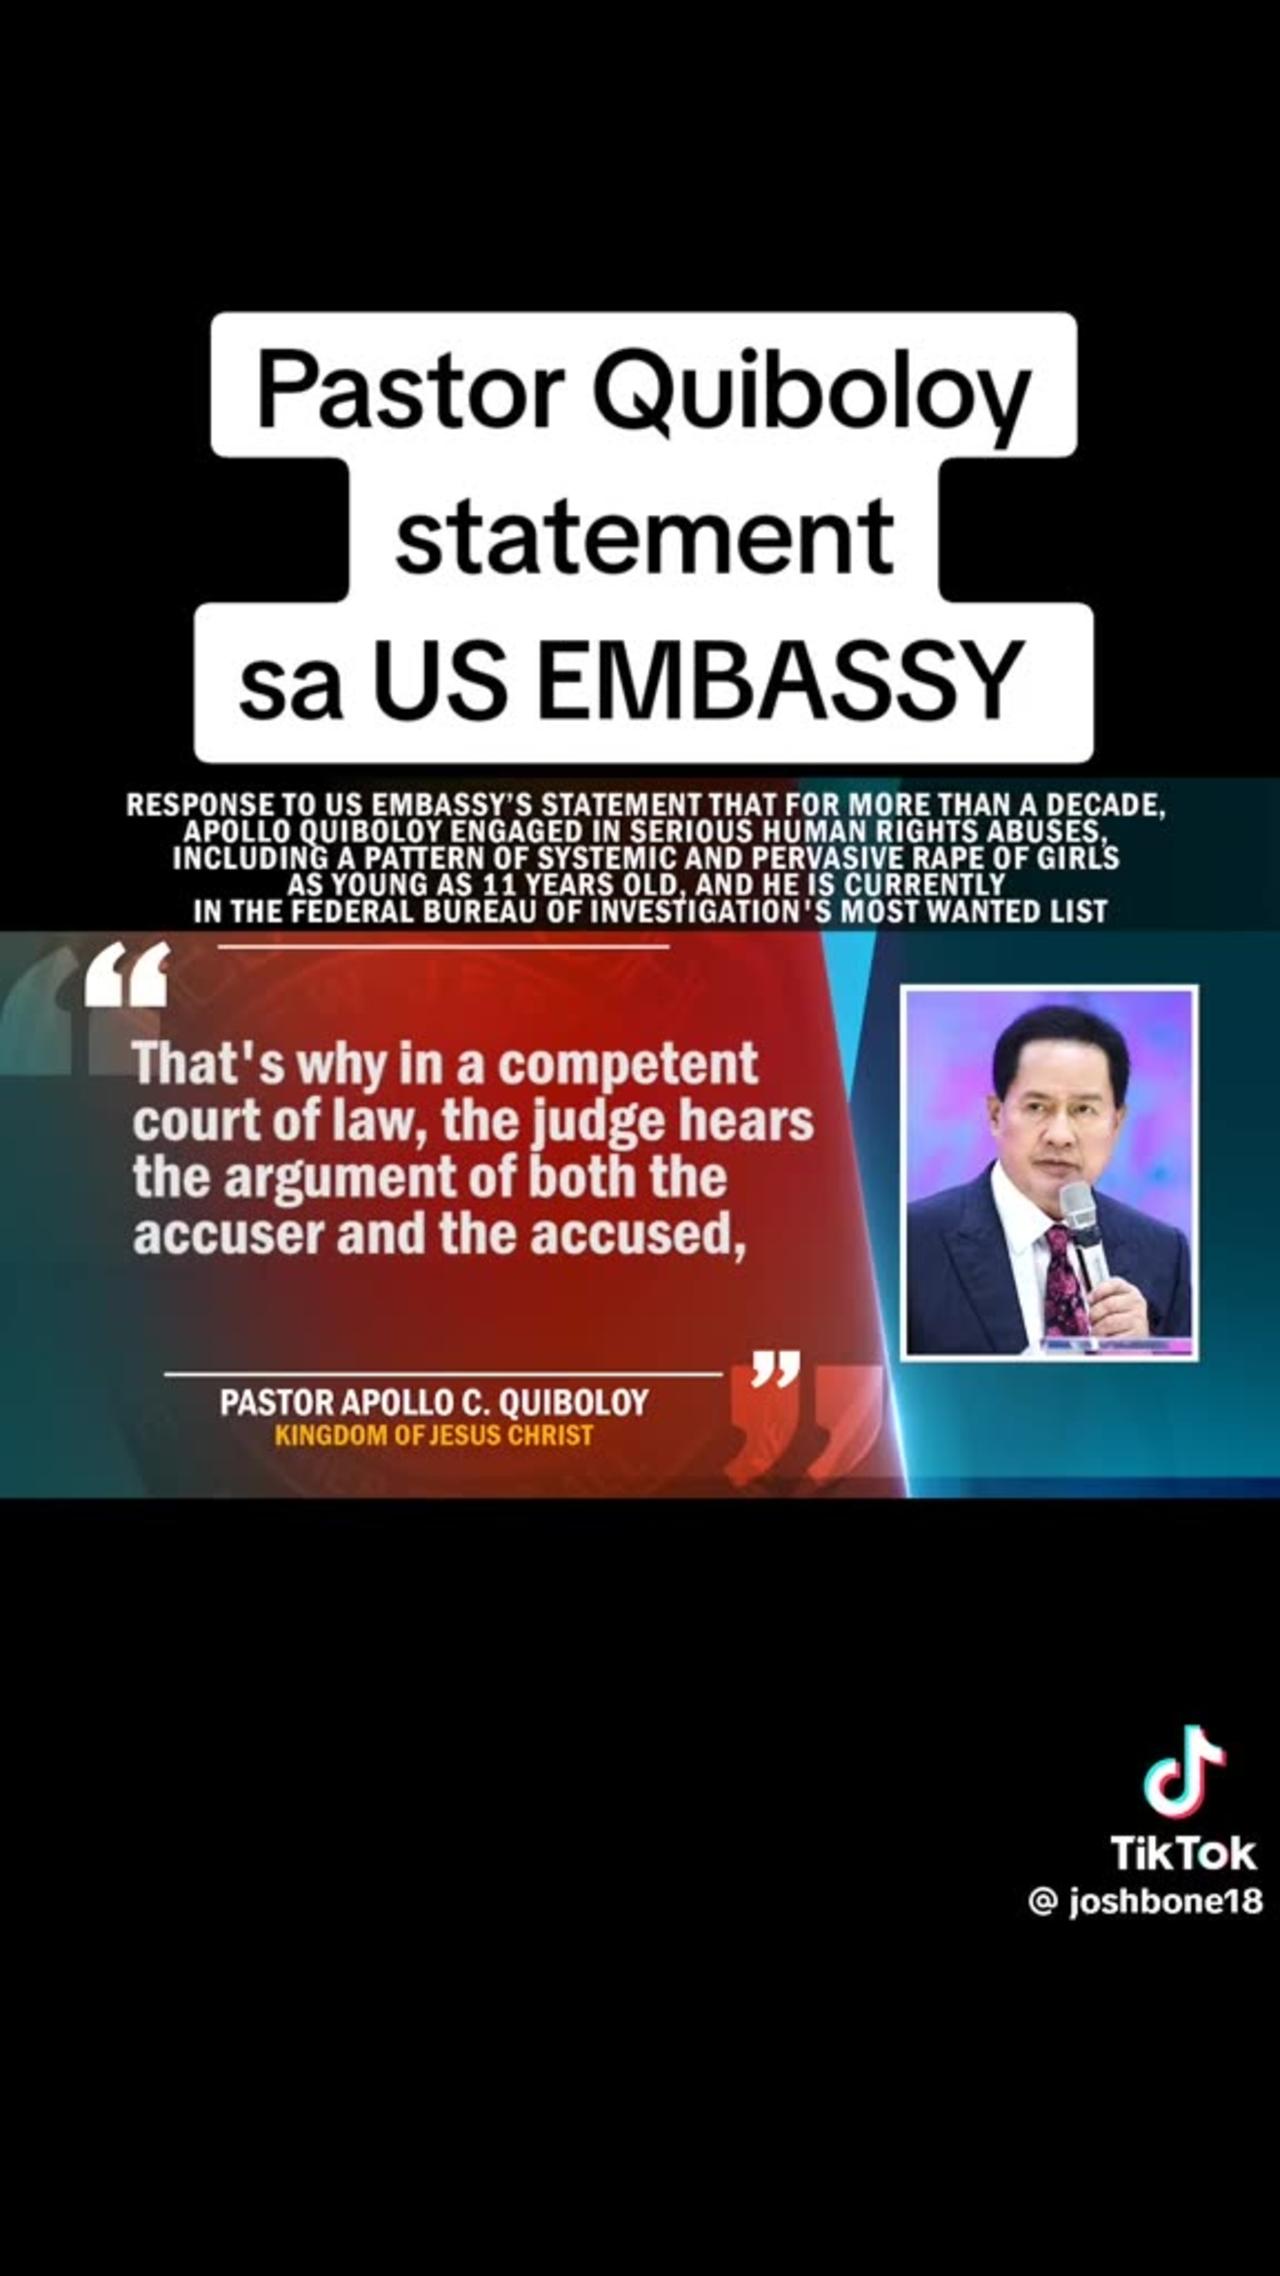 Pastor Quiboloy statement at the US Embassy